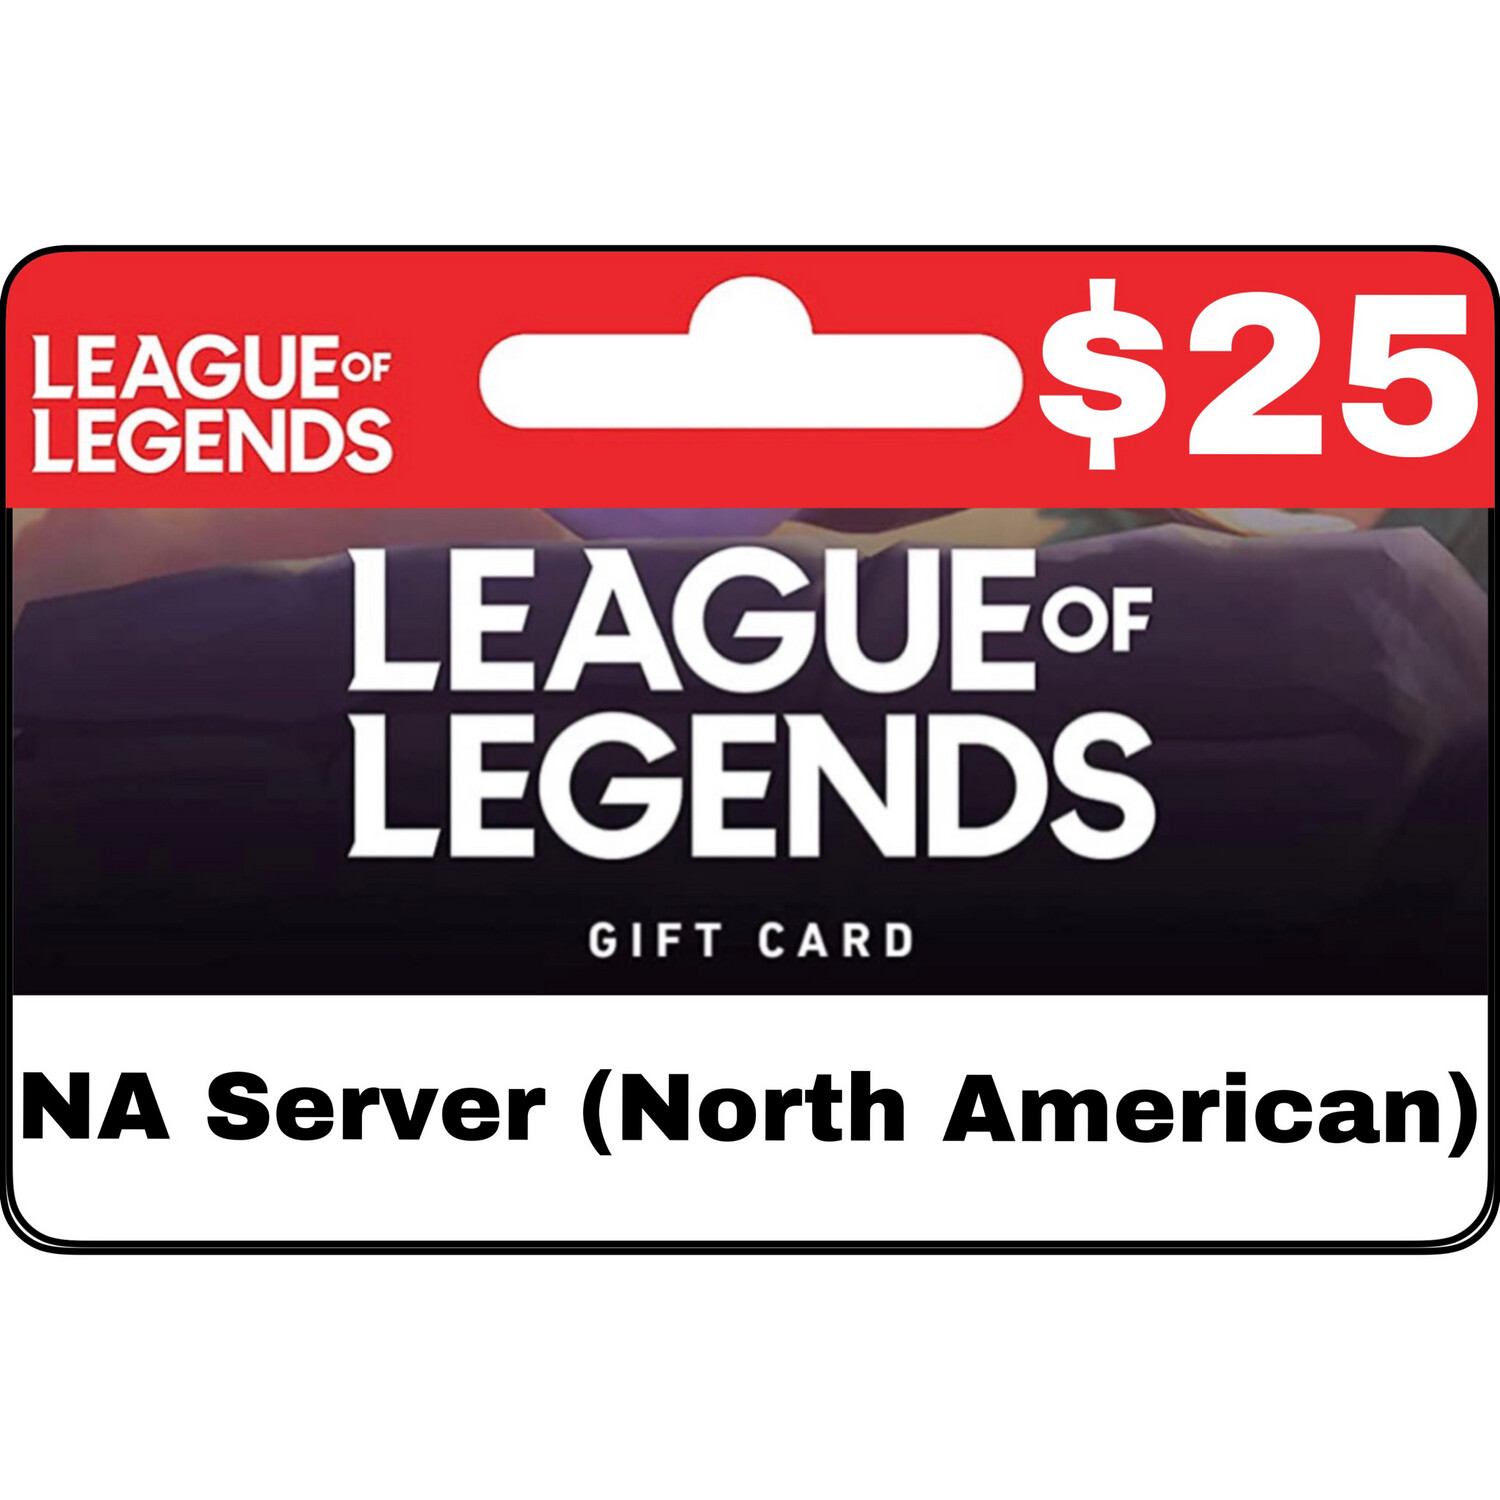 League of Legends USD $25 NA Server Gift Card